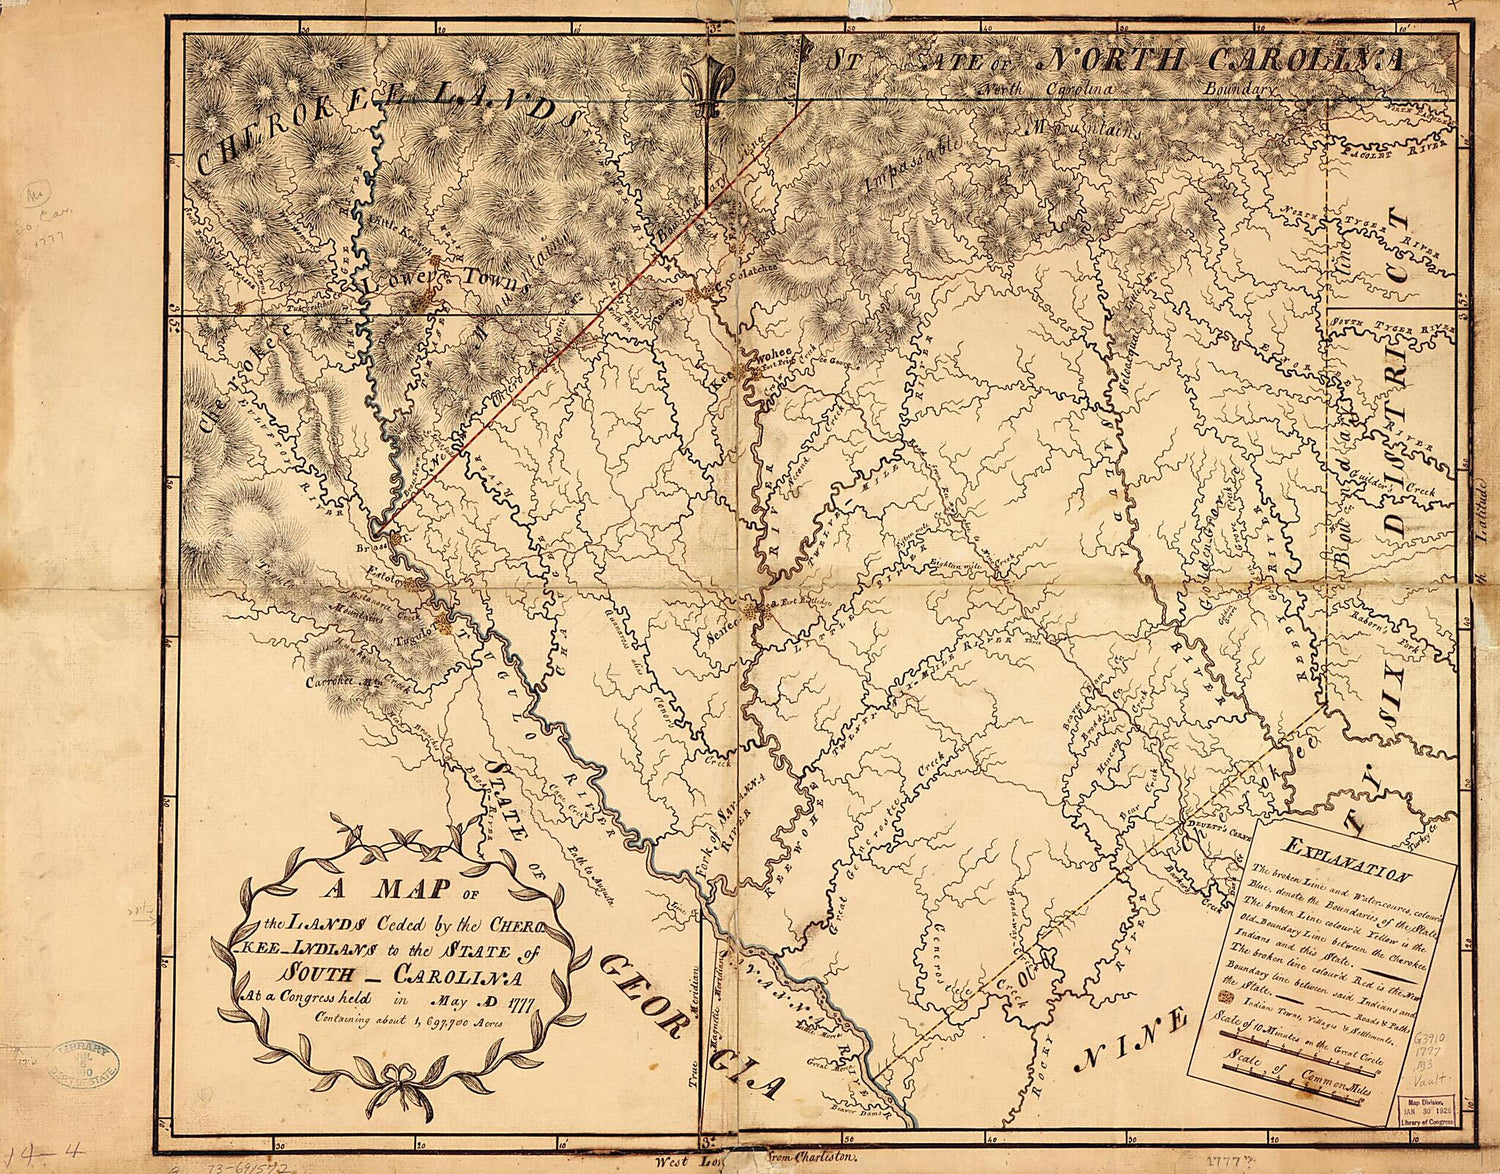 This old map of Carolina at a Congress Held In May, A.D. from 1777; Containing About 1,697,700 Acres was created by  in 1777